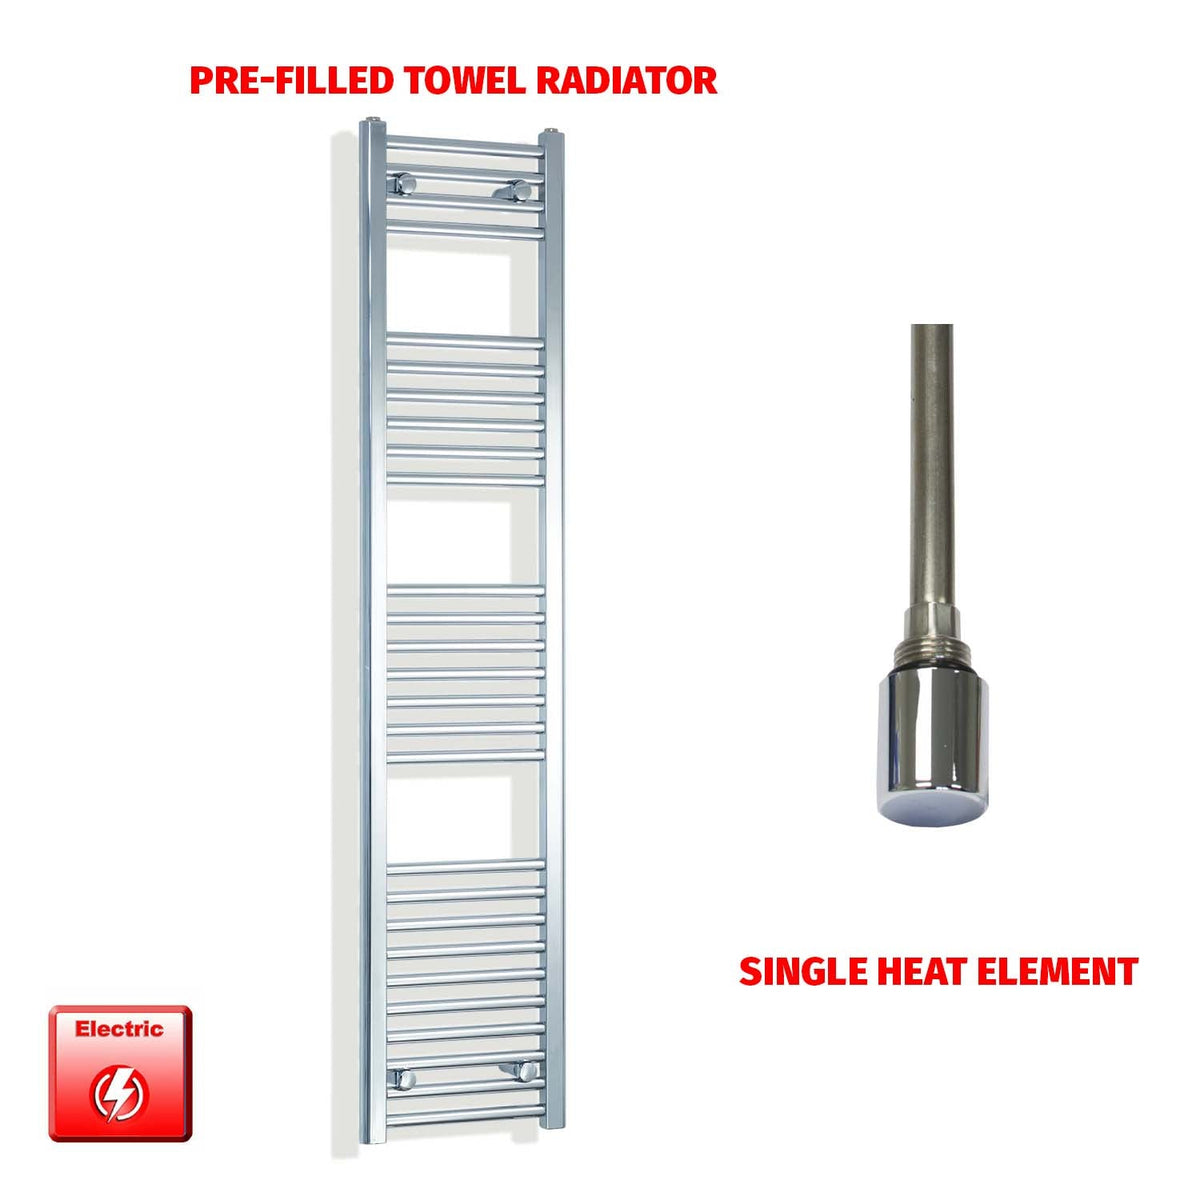 1600mm High 300mm Wide Pre-Filled Electric Heated Towel Radiator Straight Chrome Single Heat Element